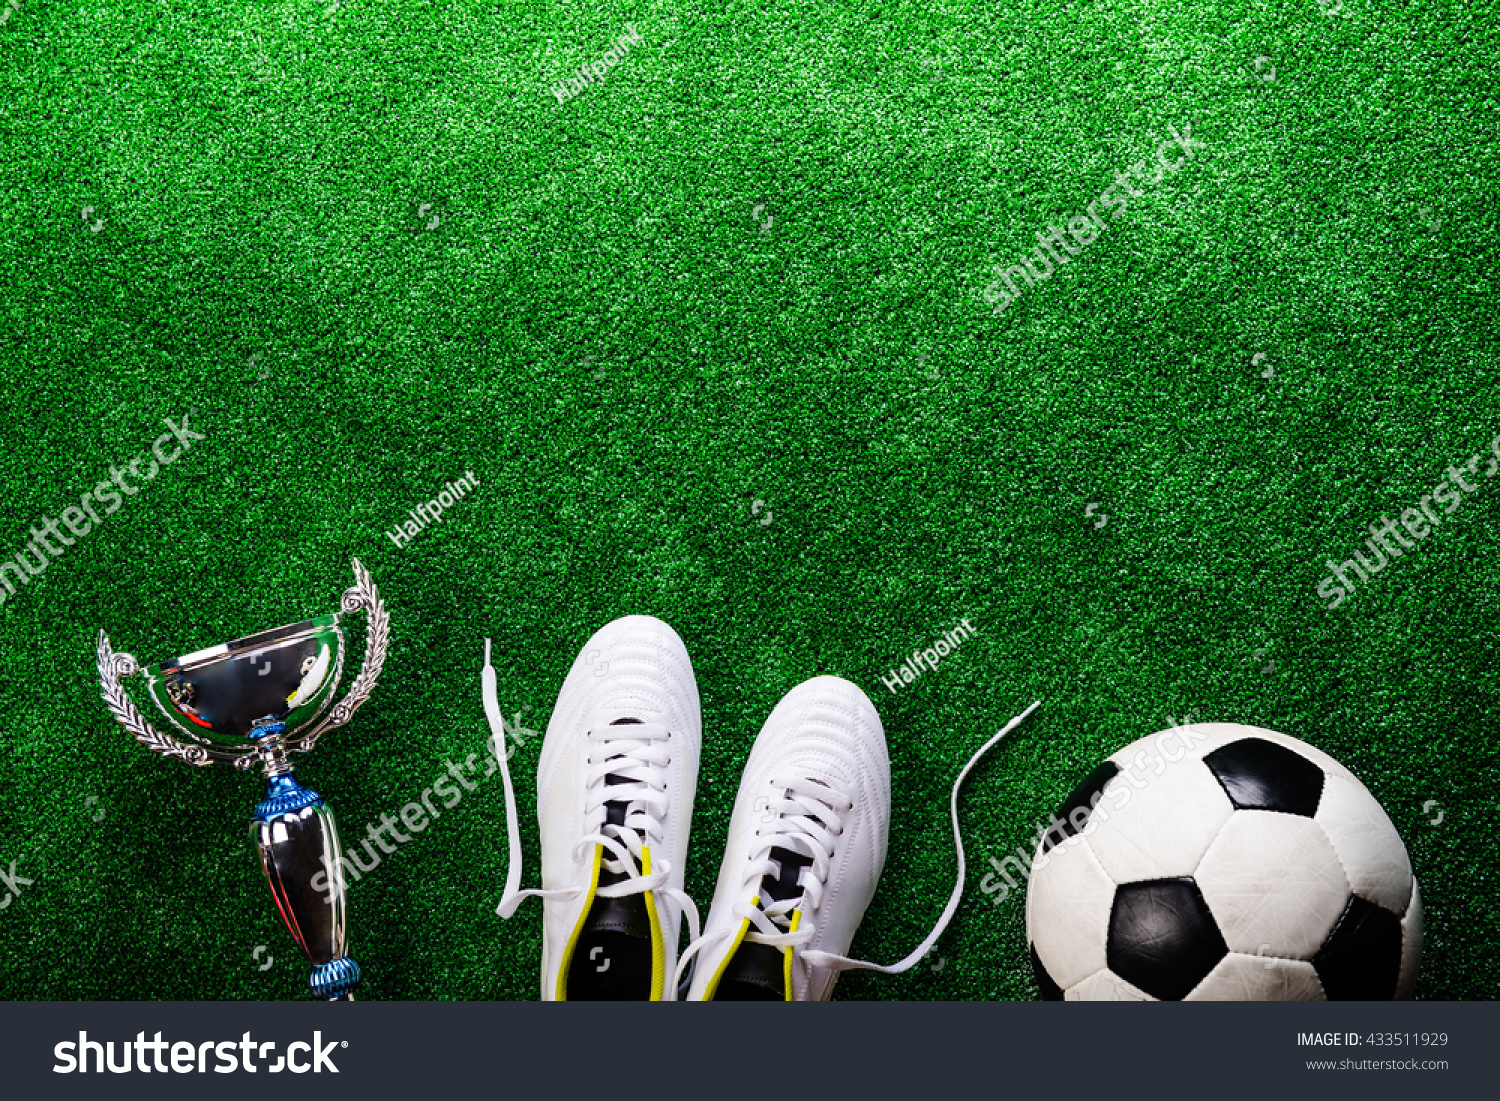 Soccer ball, cleats and trophy against green artificial turf #433511929